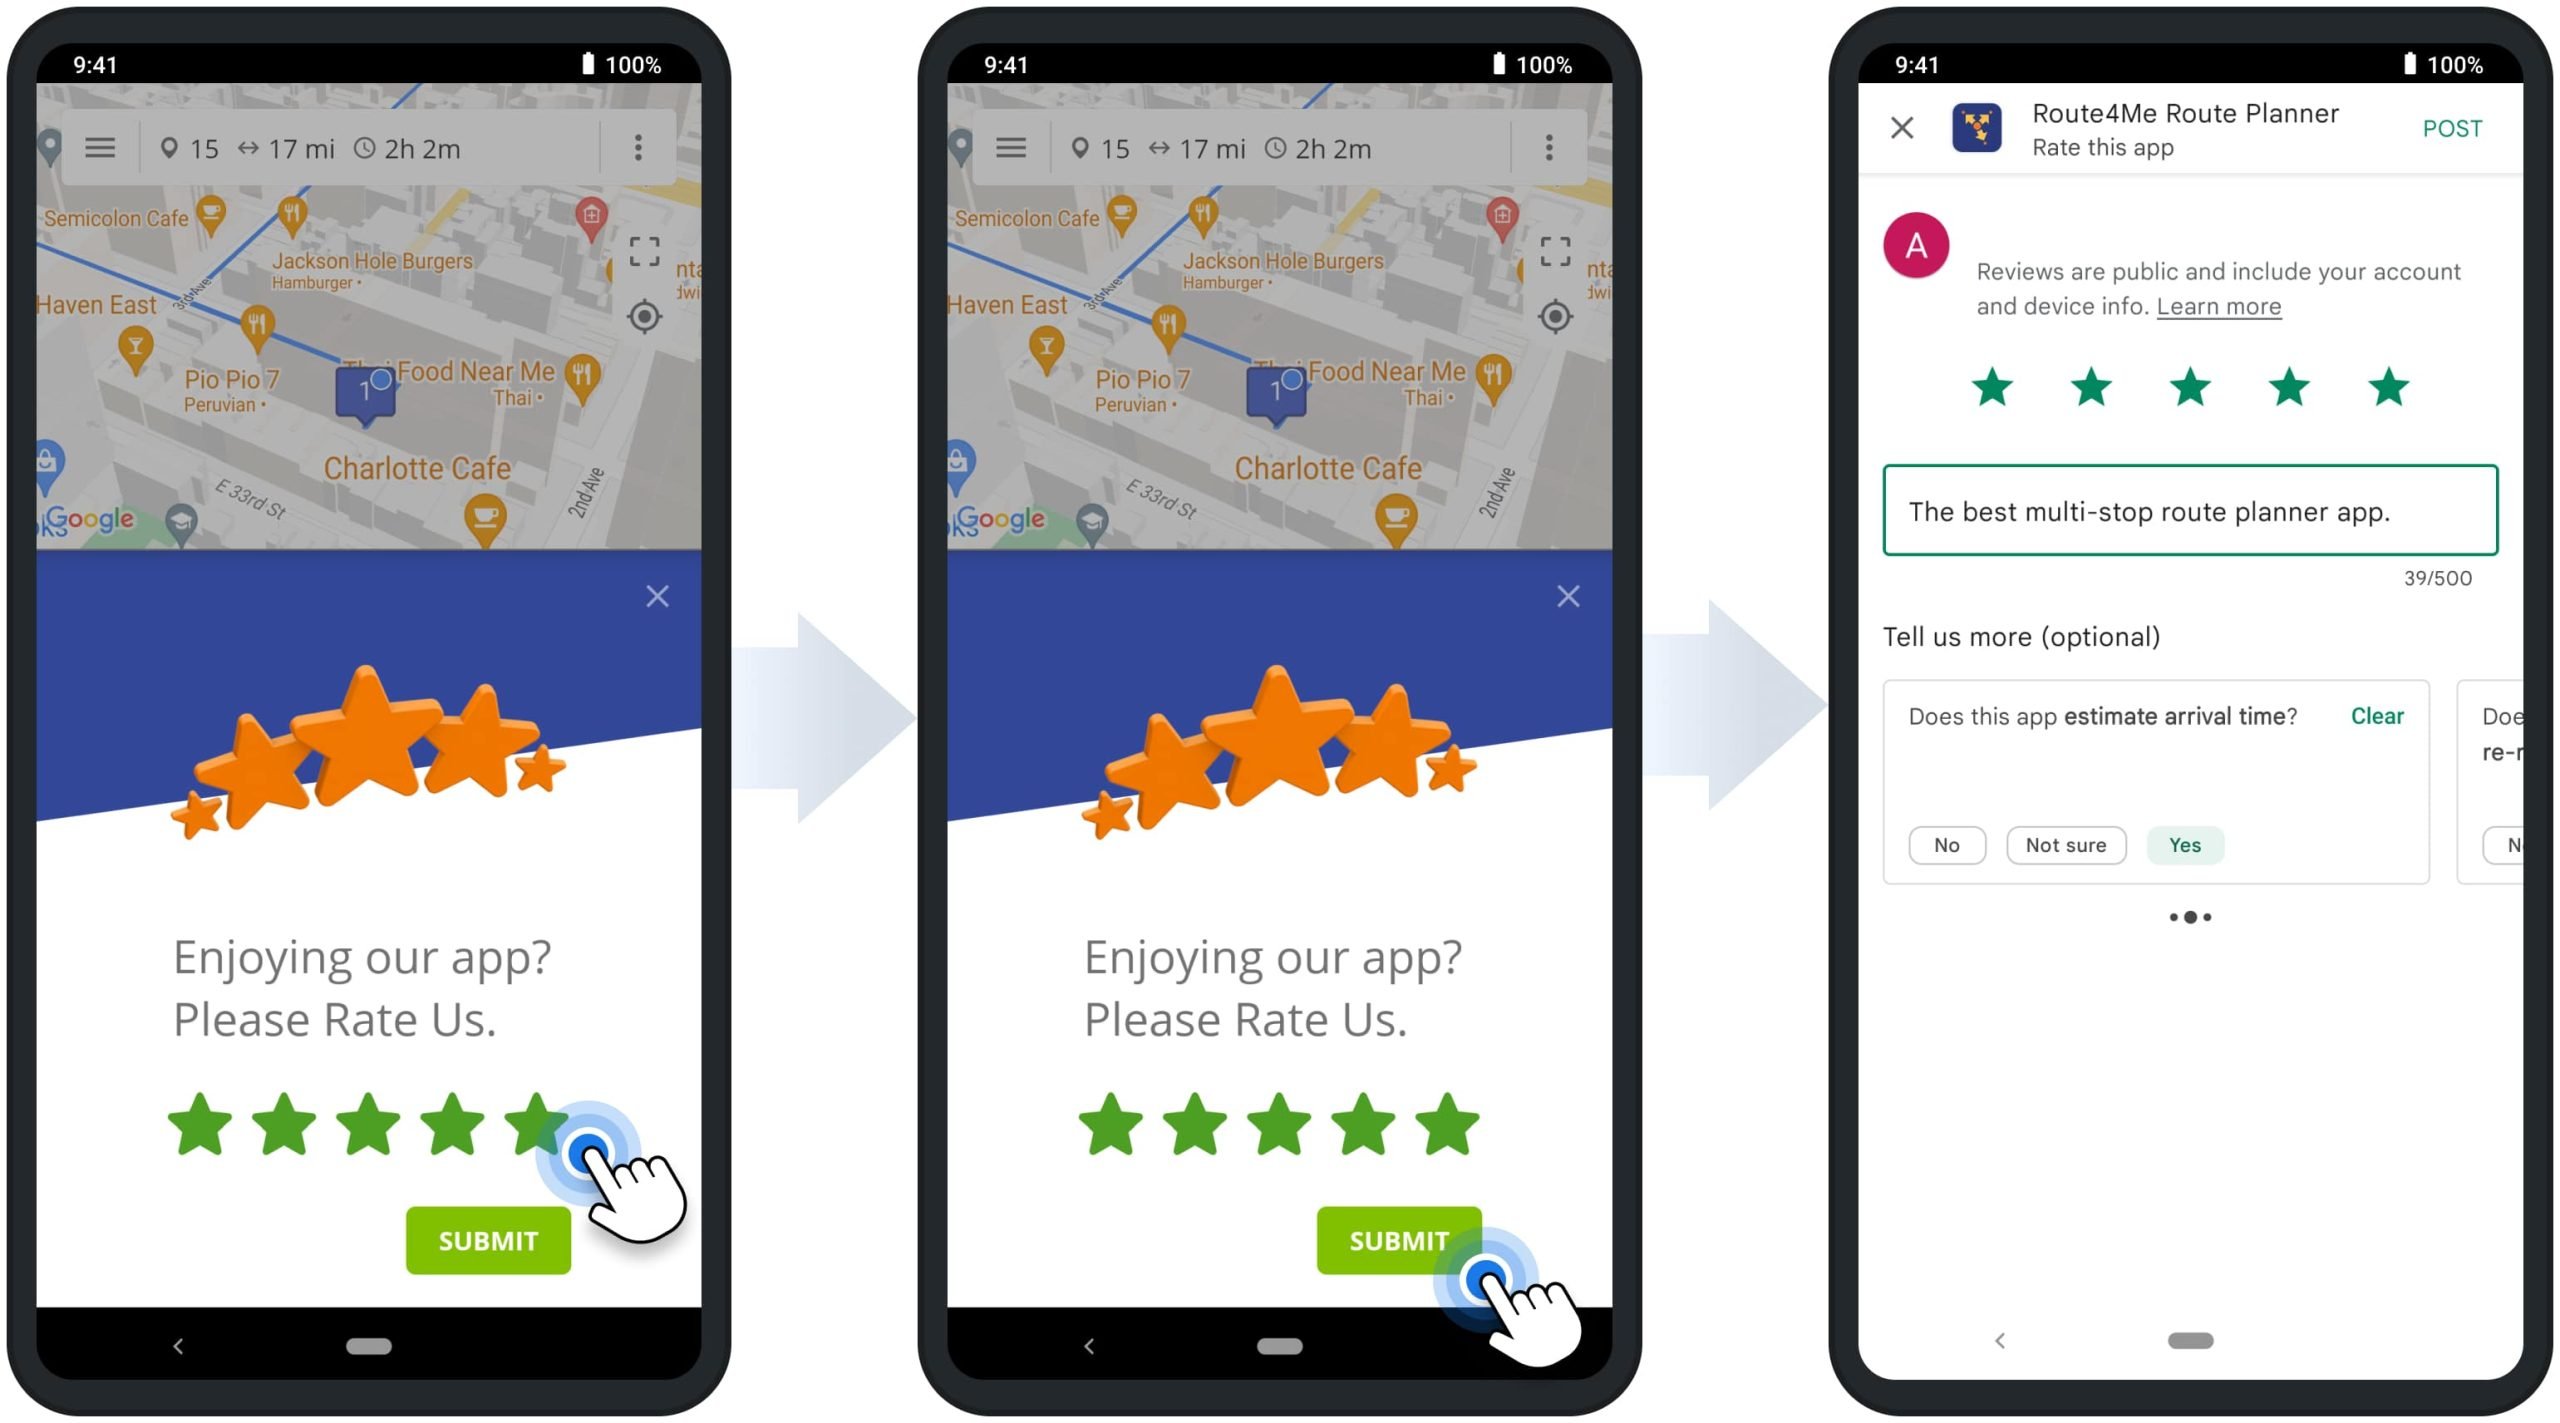 Rate Route4Me's Android Route Planner app and leave a review about the app on Google Play.